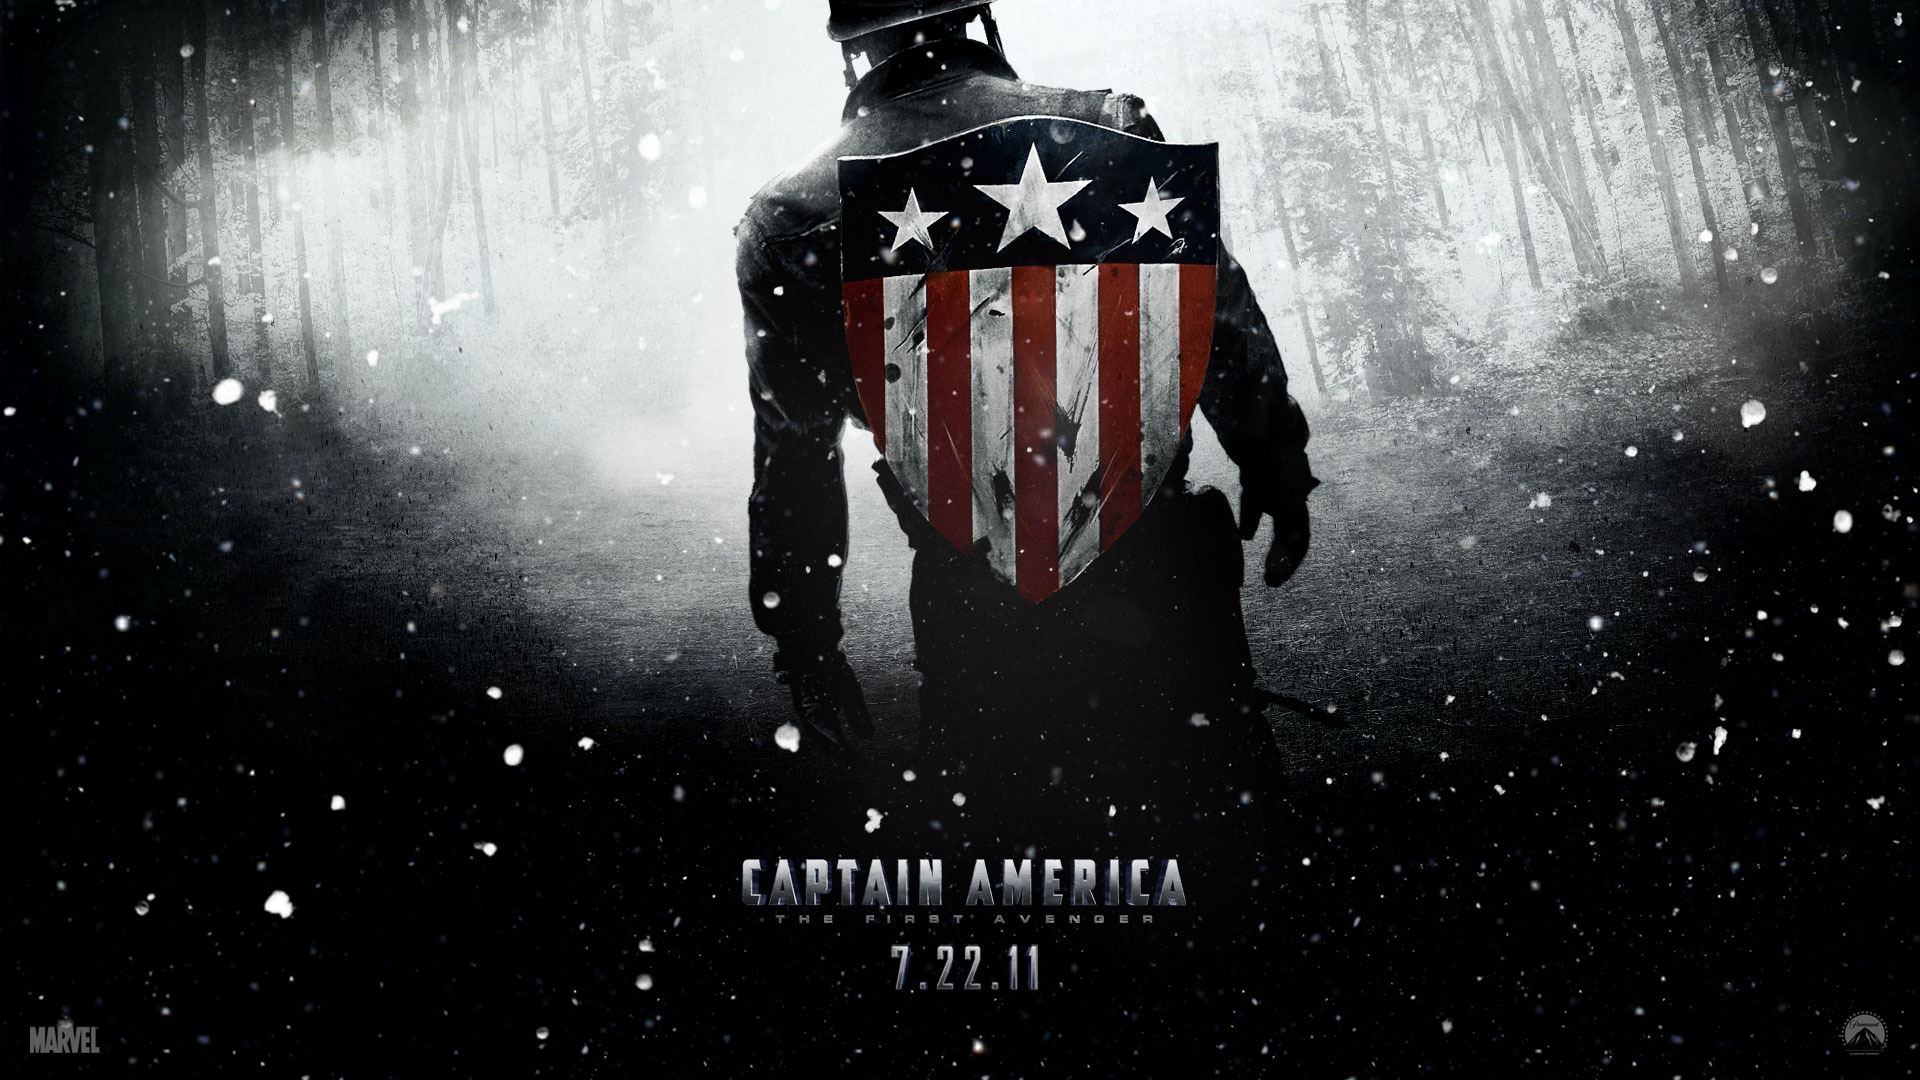 Captain America: The First Avenger wallpapers HD #3 - 1920x1080